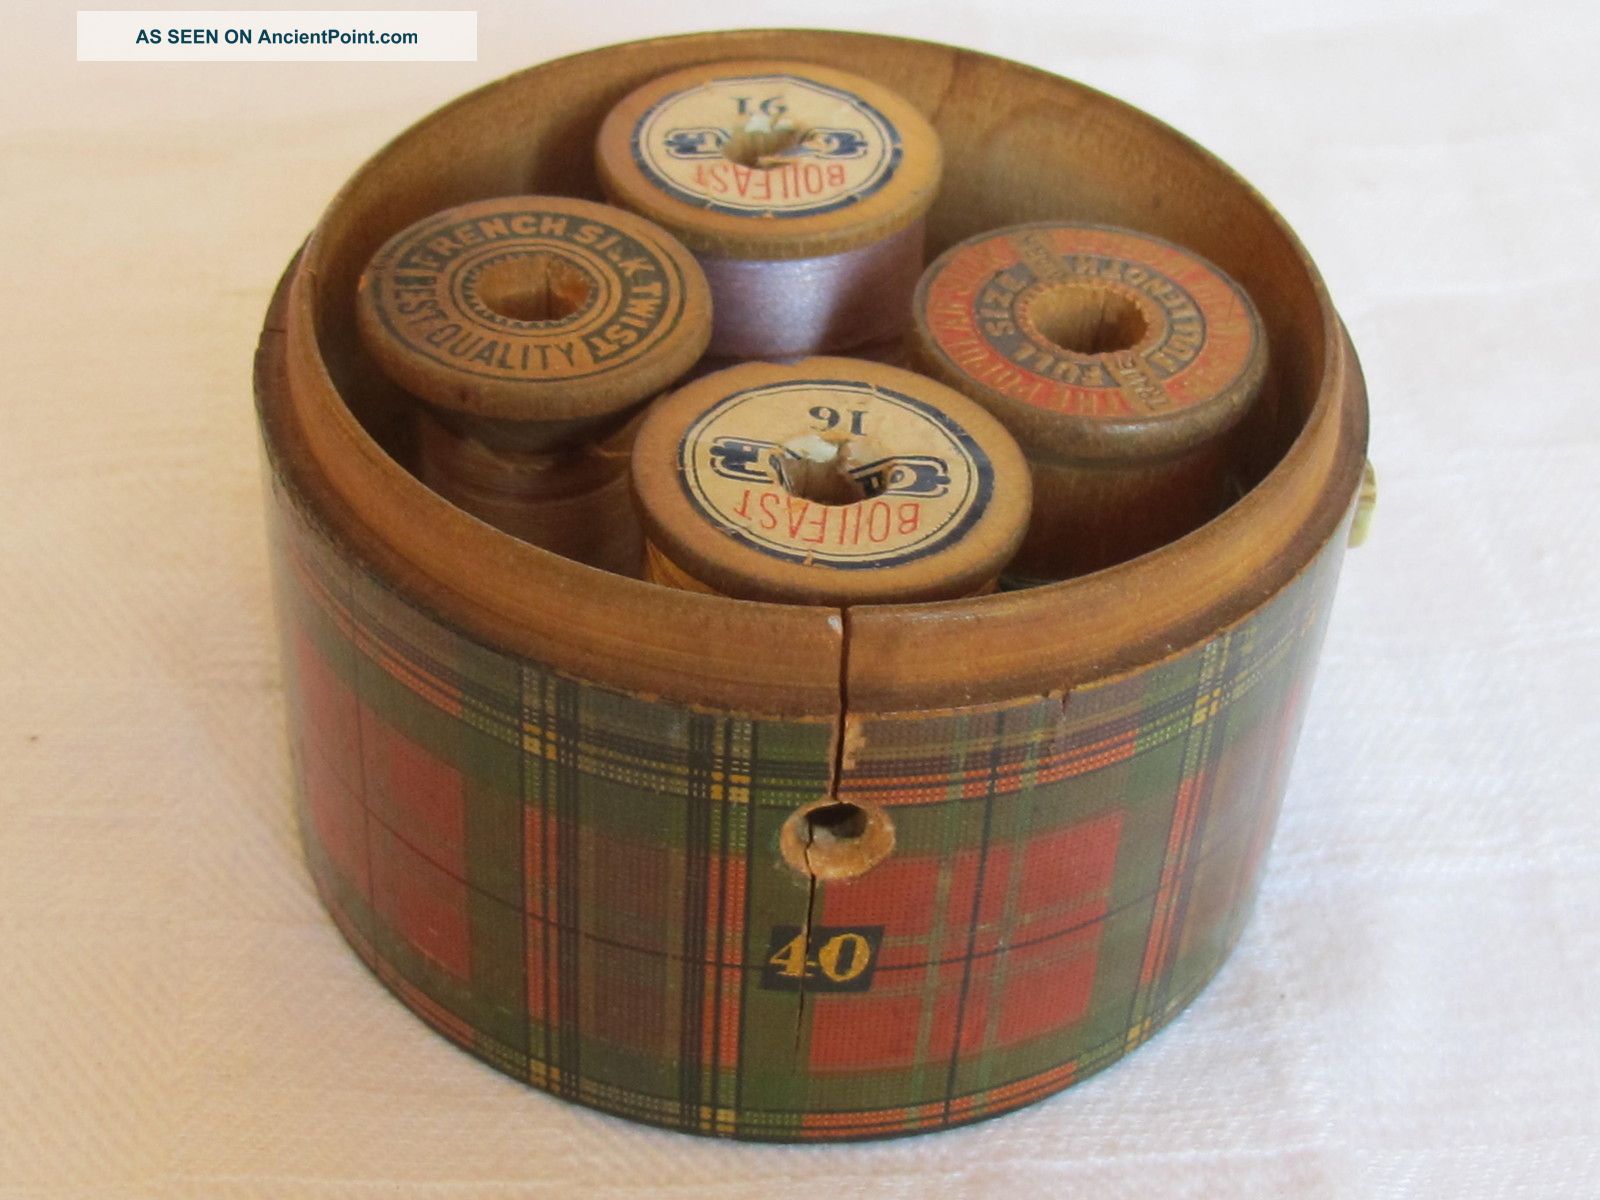 Antique 4 Spool Thread Container Holder Round Wood Box Dispenser Plaid Baskets & Boxes photo